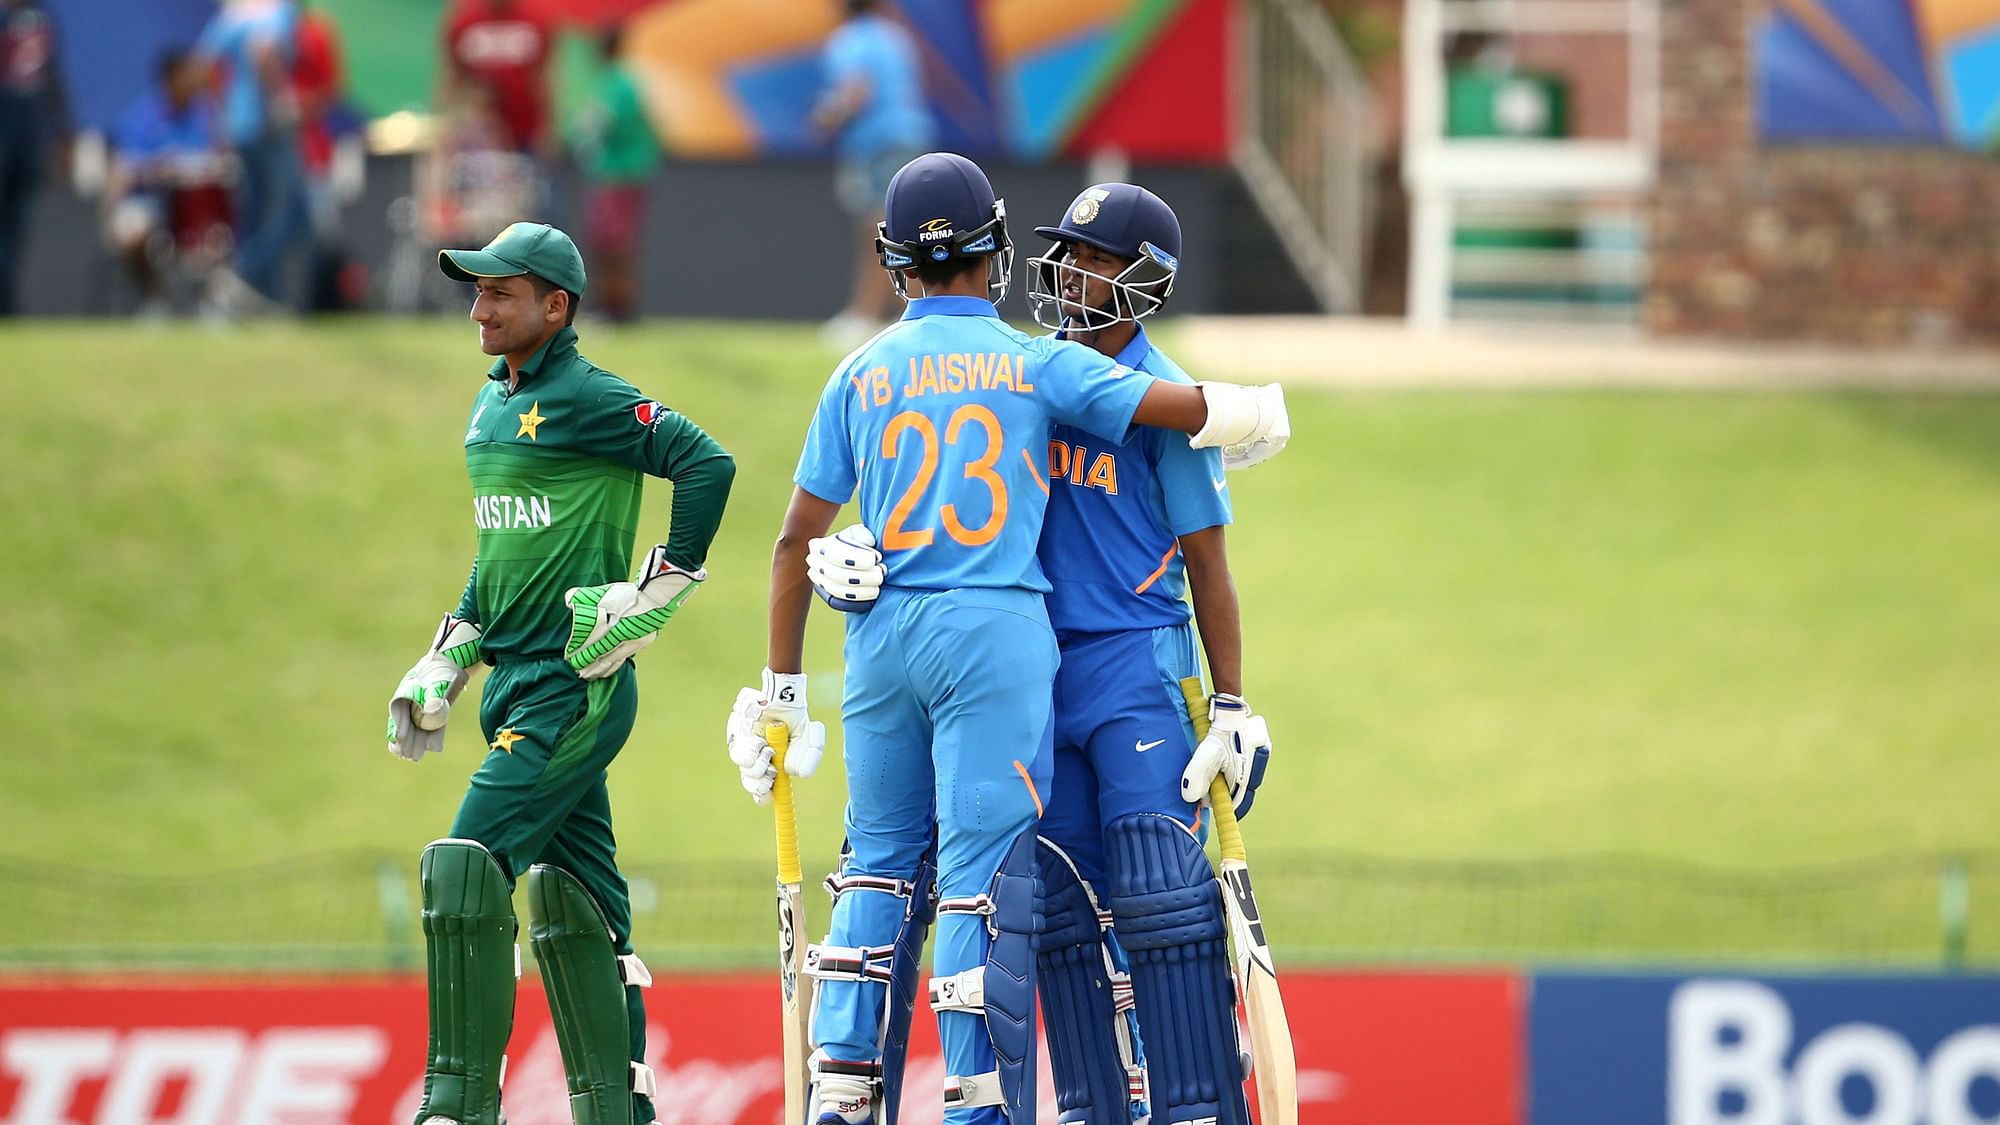  India vs Pakistan U19 LIVE Score Updates: The India Under-19 team are unbeaten in the tournament so far and is taking a formidable opposition in Pakistan who have also not tasted defeat so far.